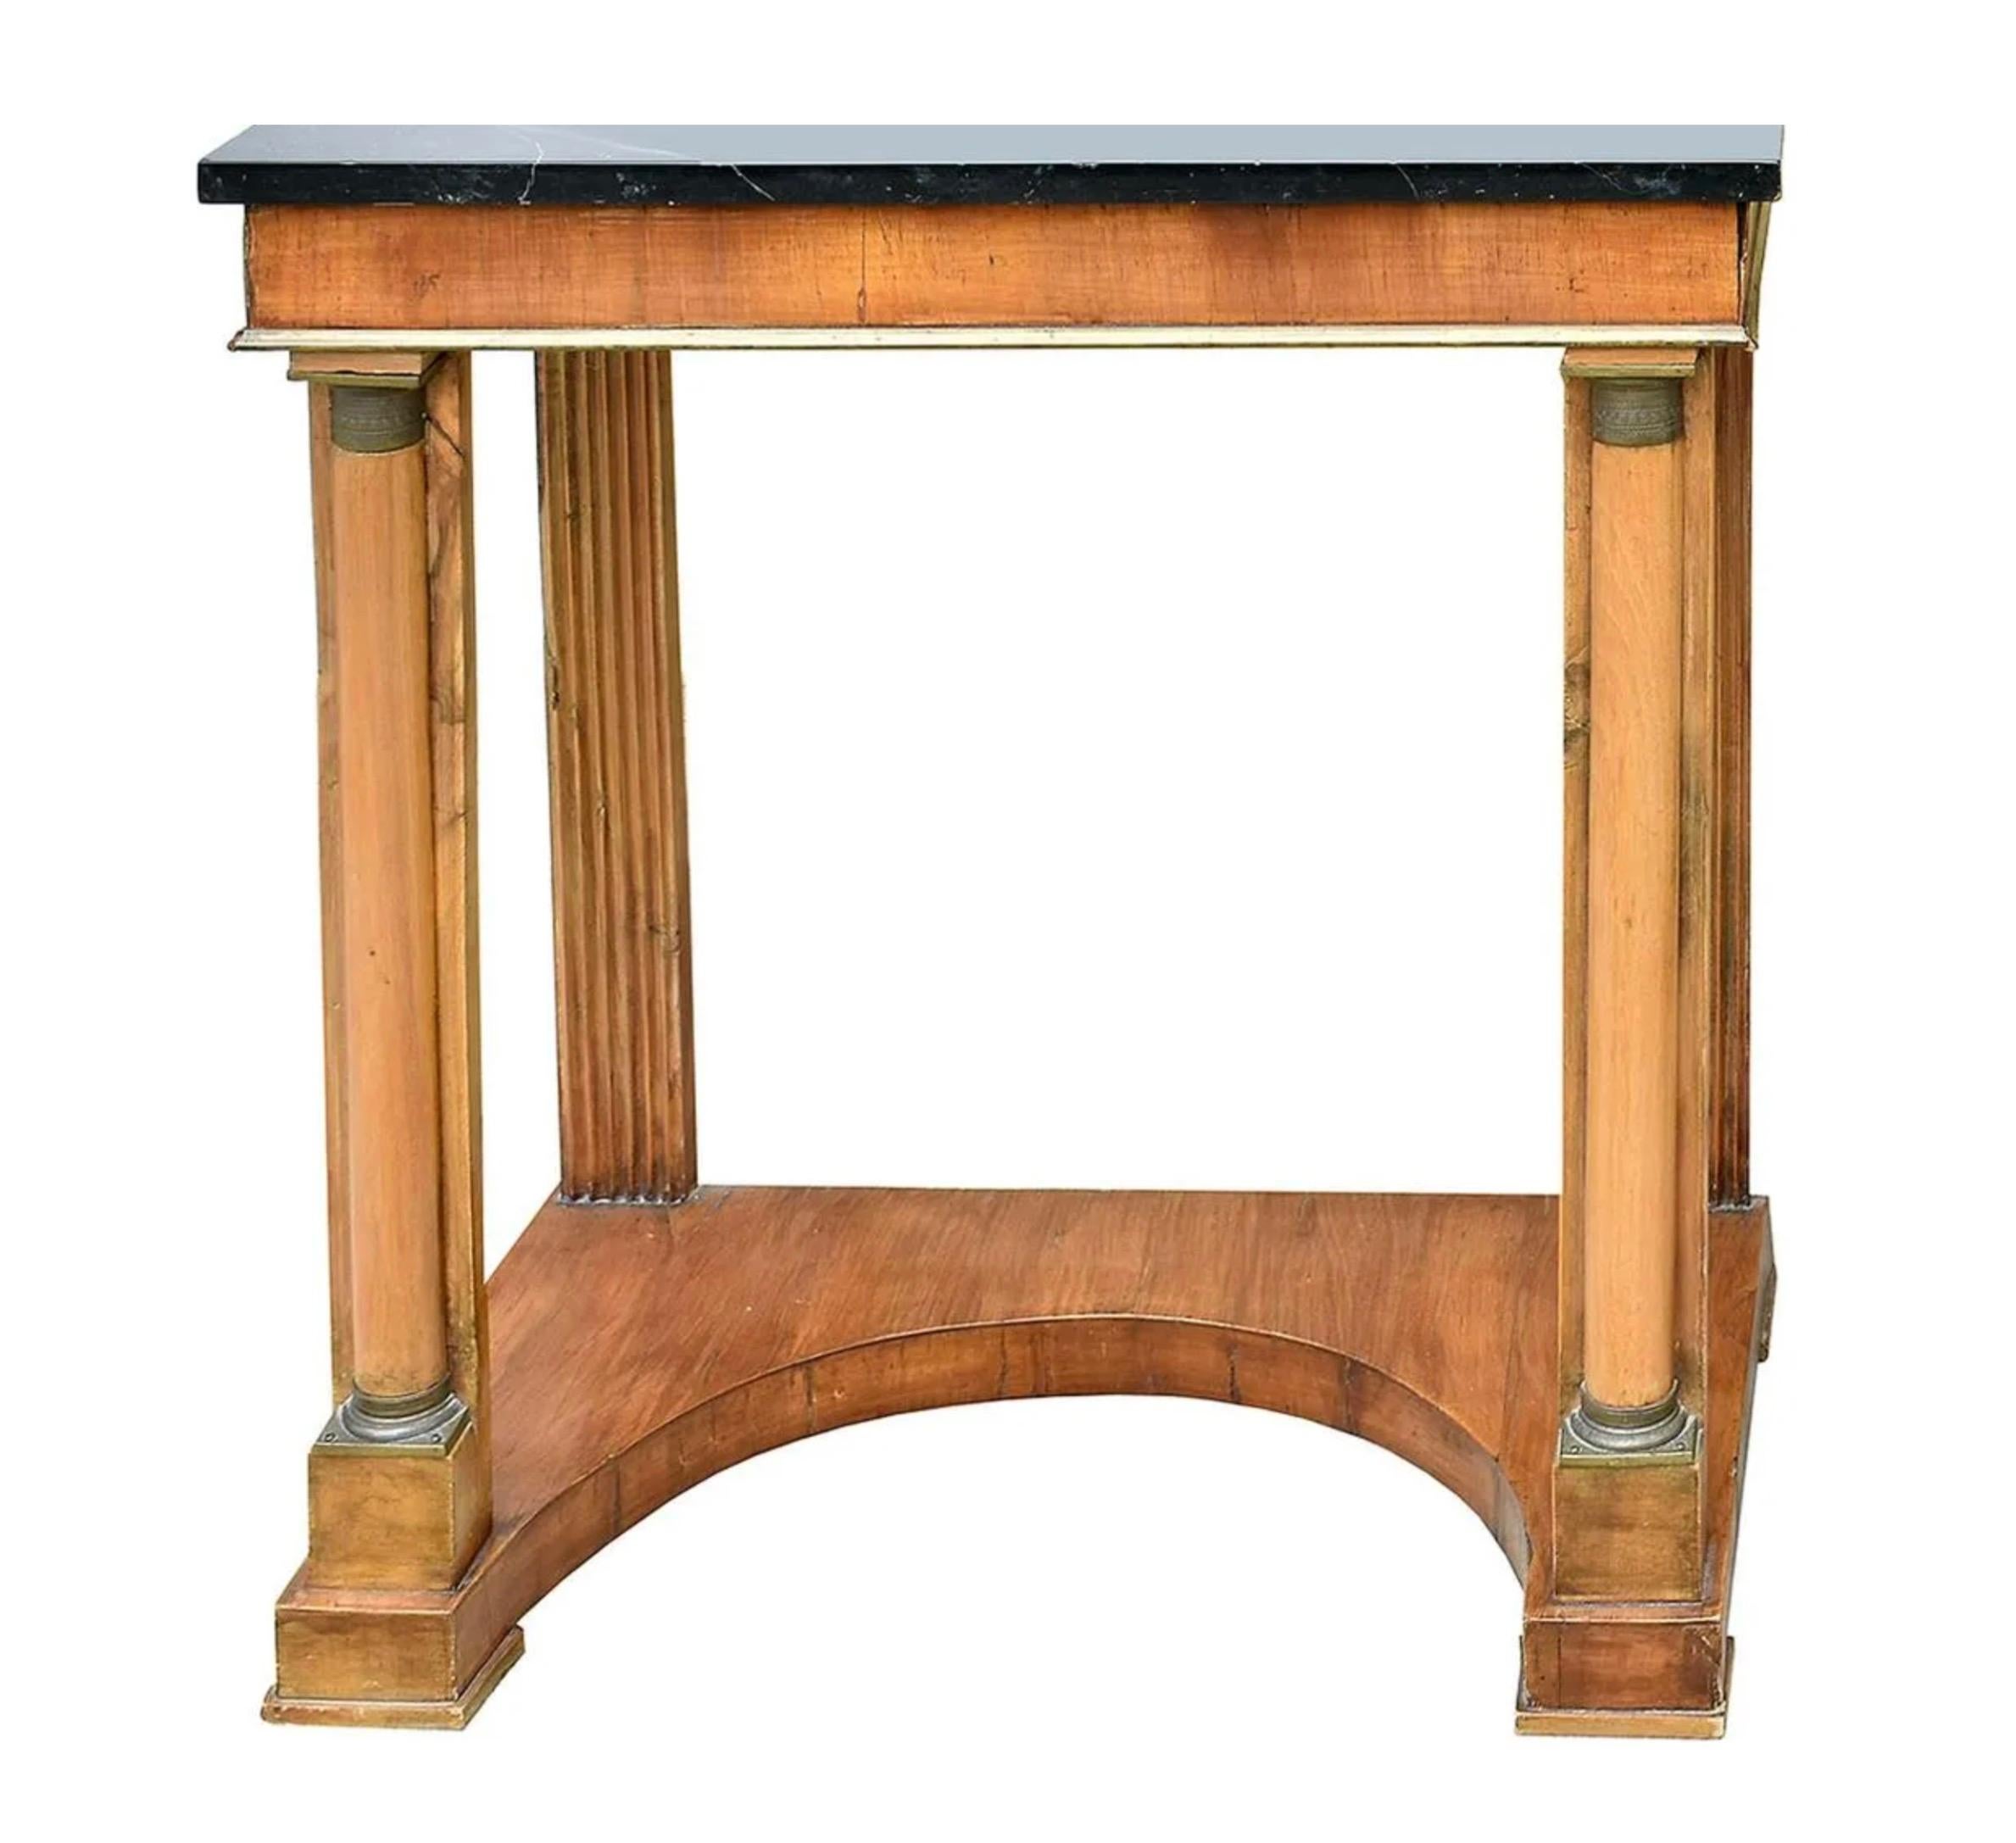 Beautiful pair of Antique French Empire side tables. Each painted rectangular top above a frieze fitted with a drawer, on supports within engaged half columns, set upon a concave platform base. Height 28 in. Width 26 in. Depth 14 in.

French walnut